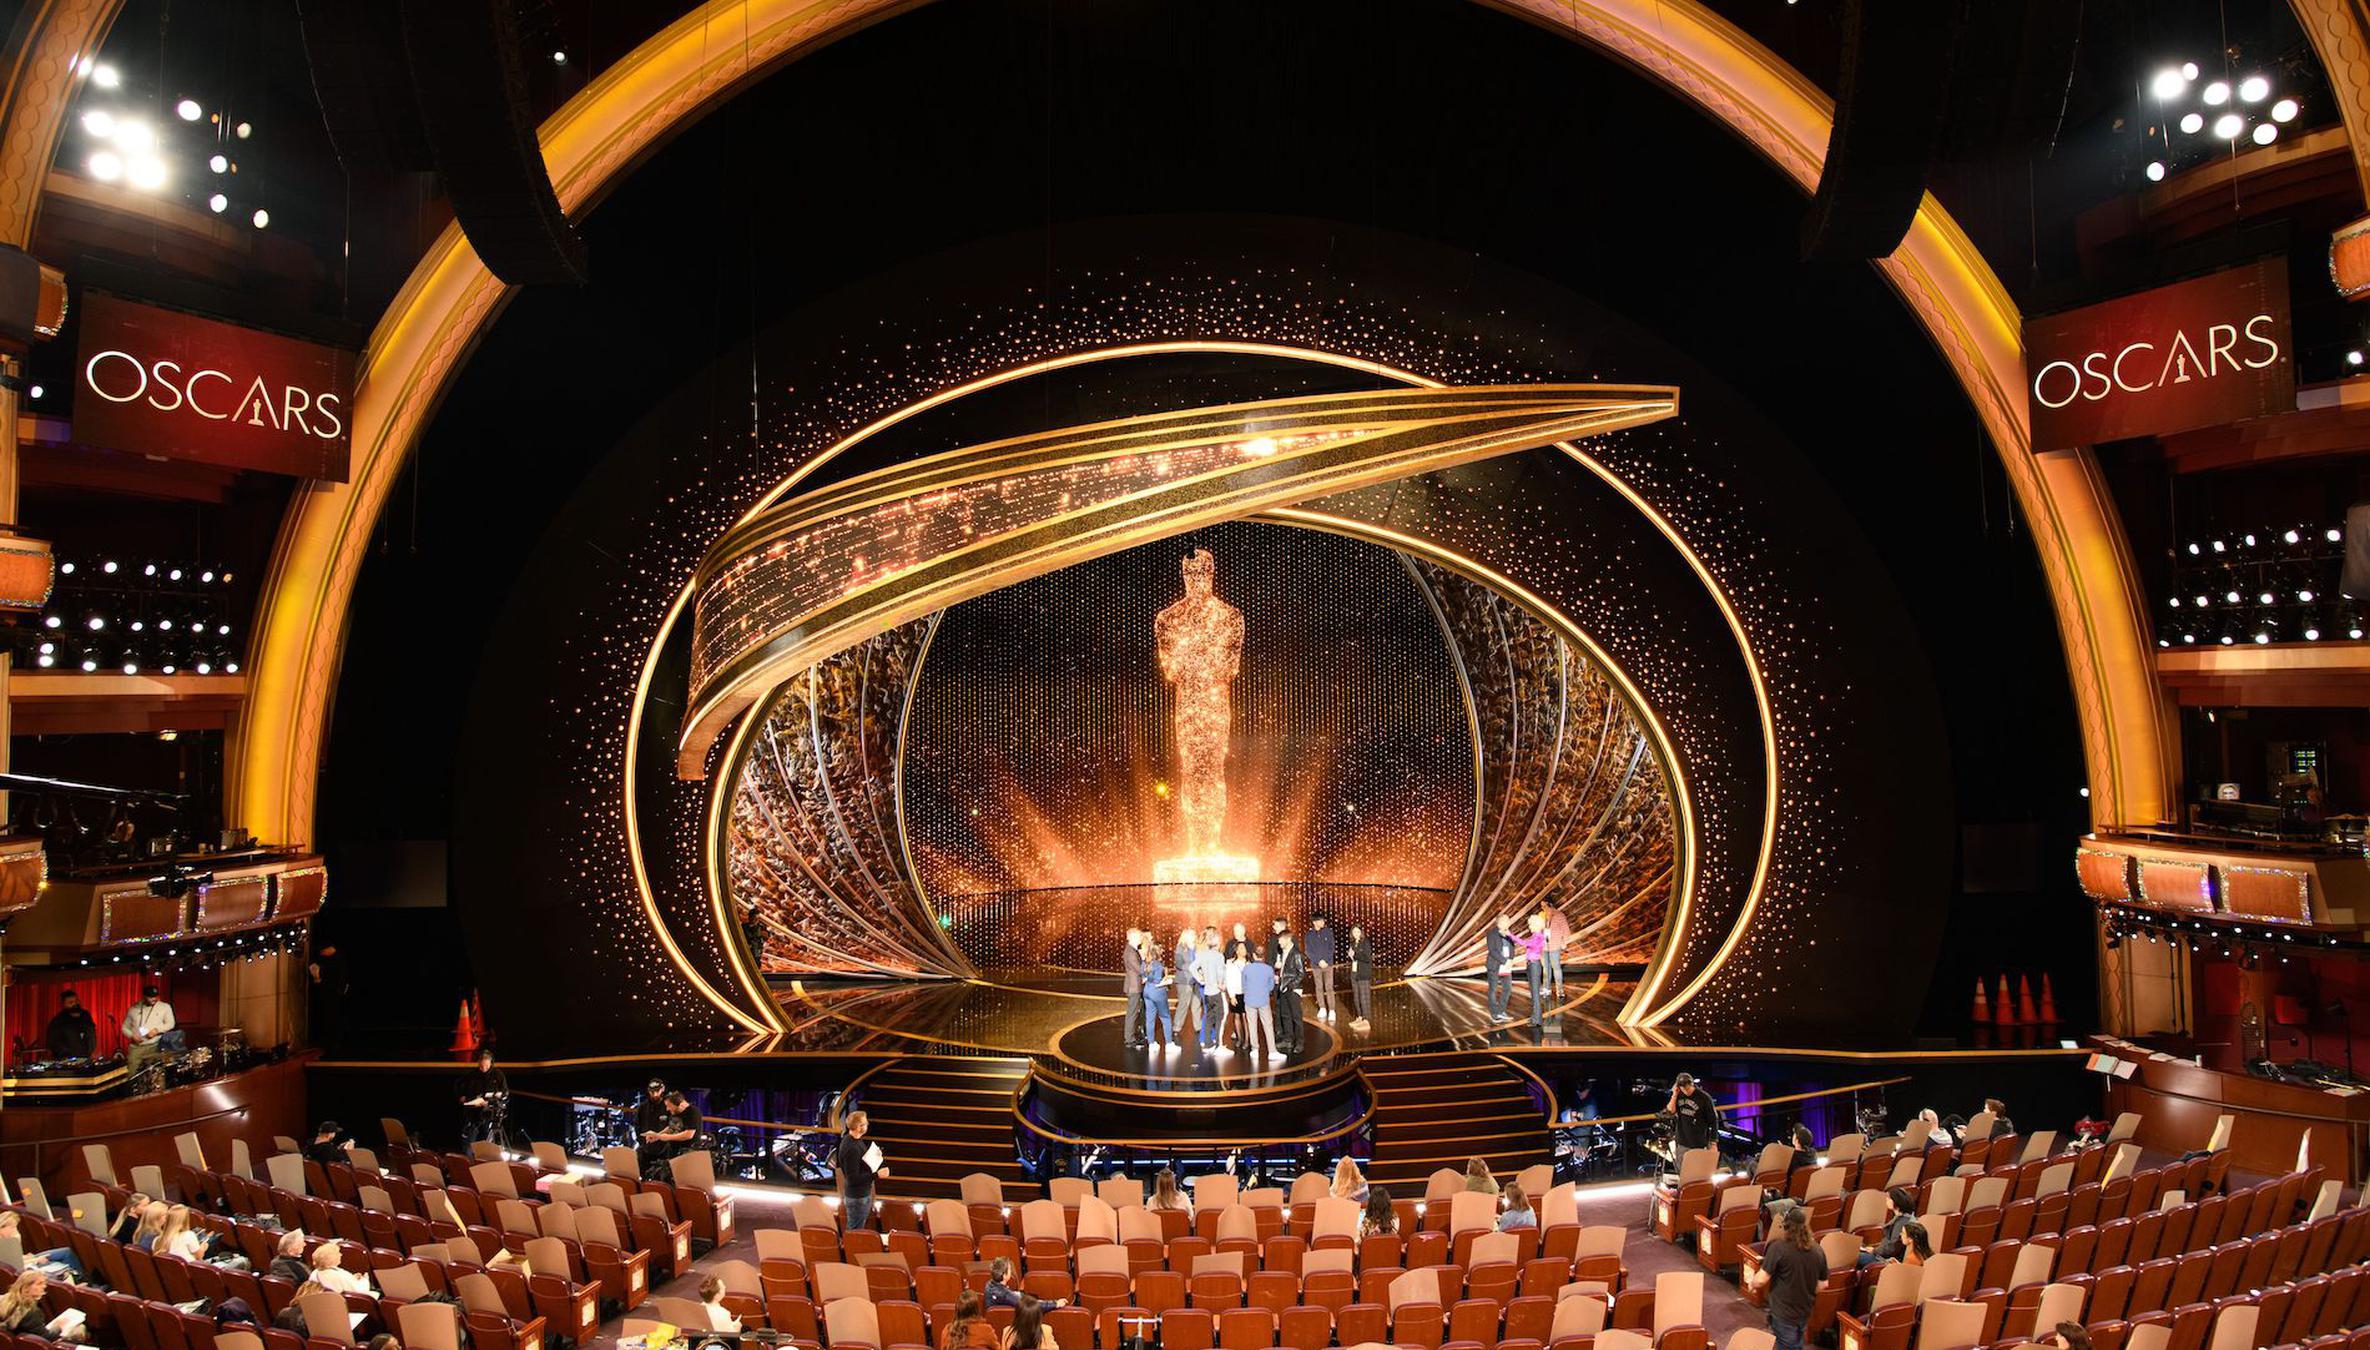 The 2020 Oscars Set Was Built to Reflect the Diverse Year in Film